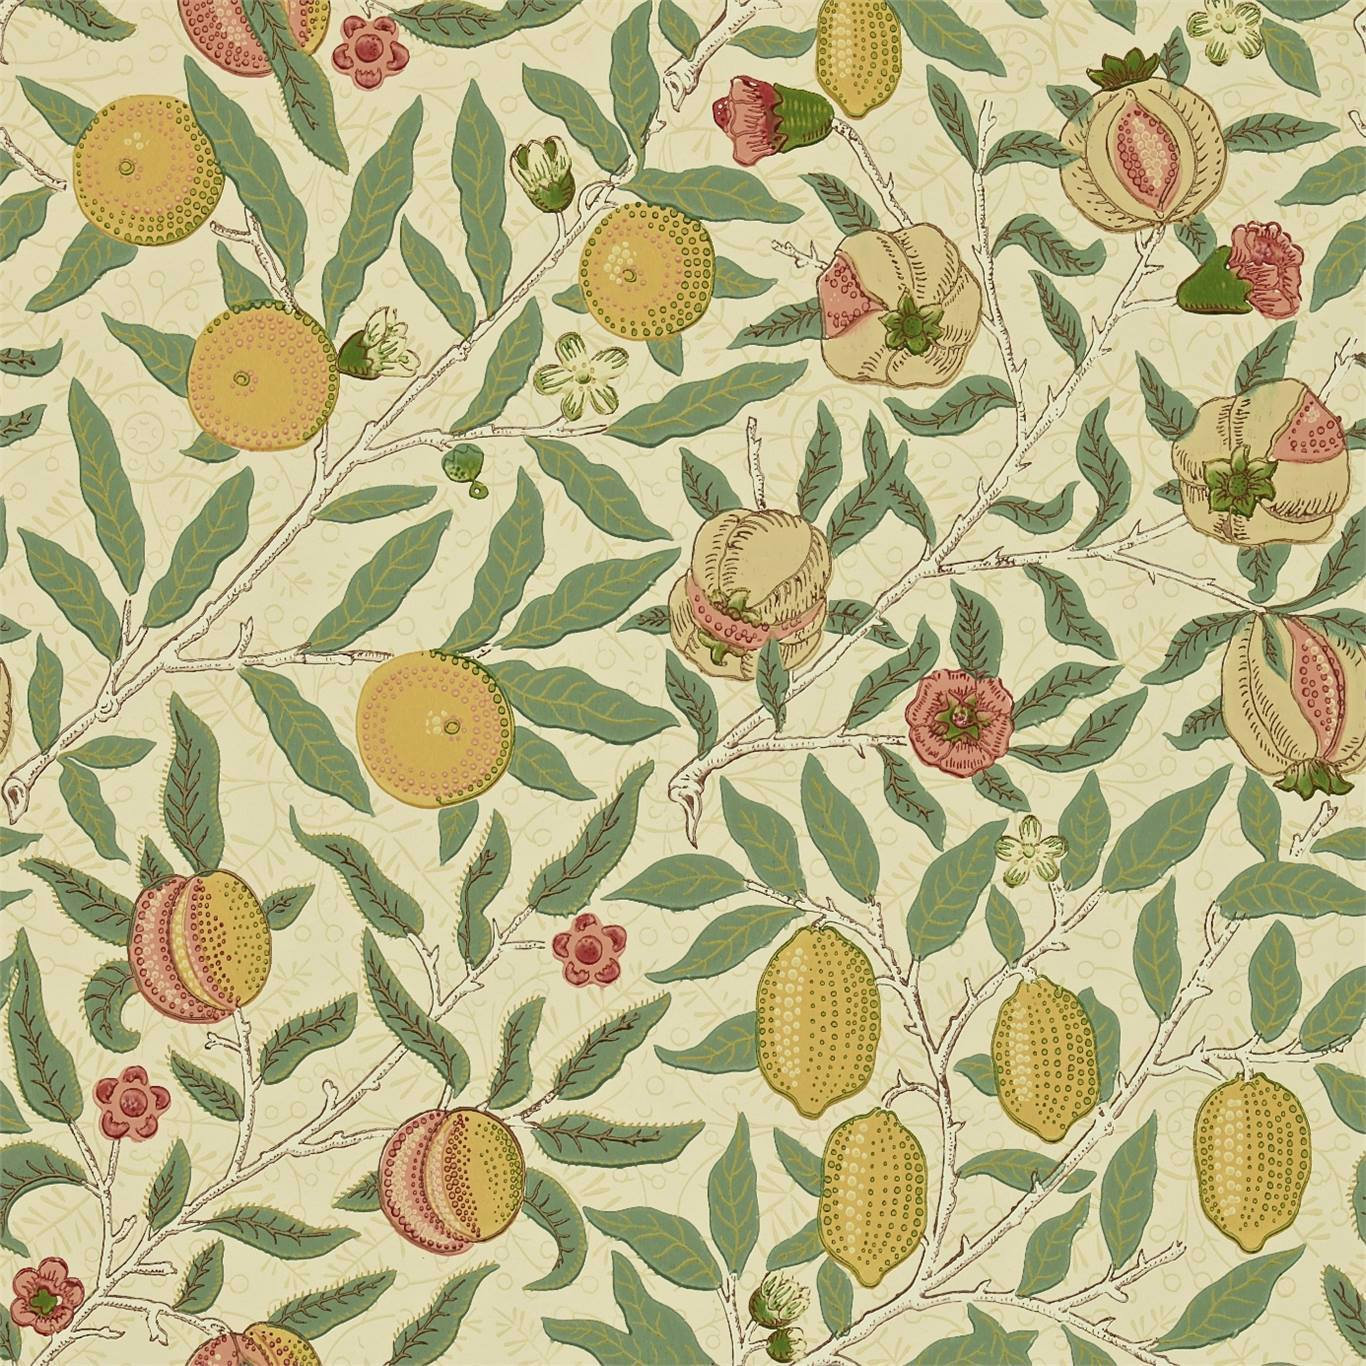 Fruit Beige/Gold/Coral Wallpaper DCMW216859 by Morris & Co